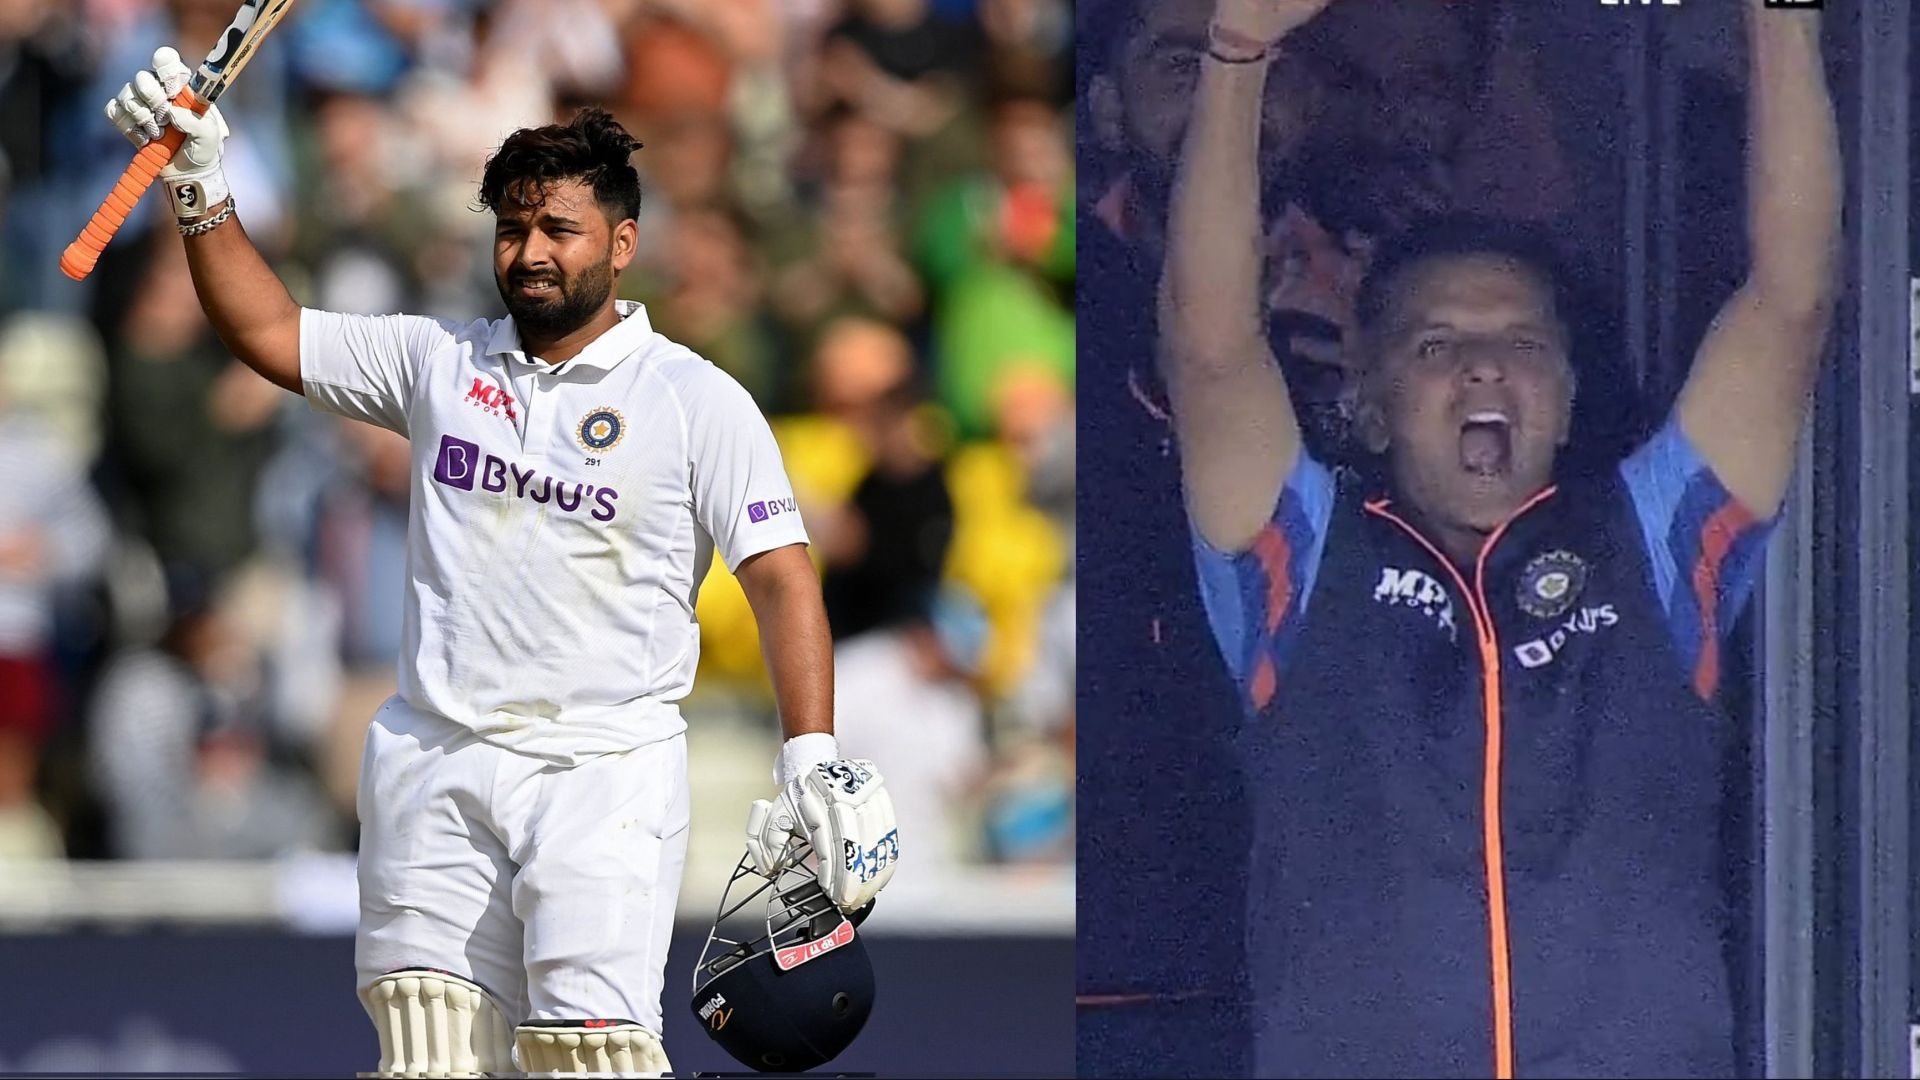 Rishabh Pant has registered his second Test hundred on English soil (Image: Twitter)